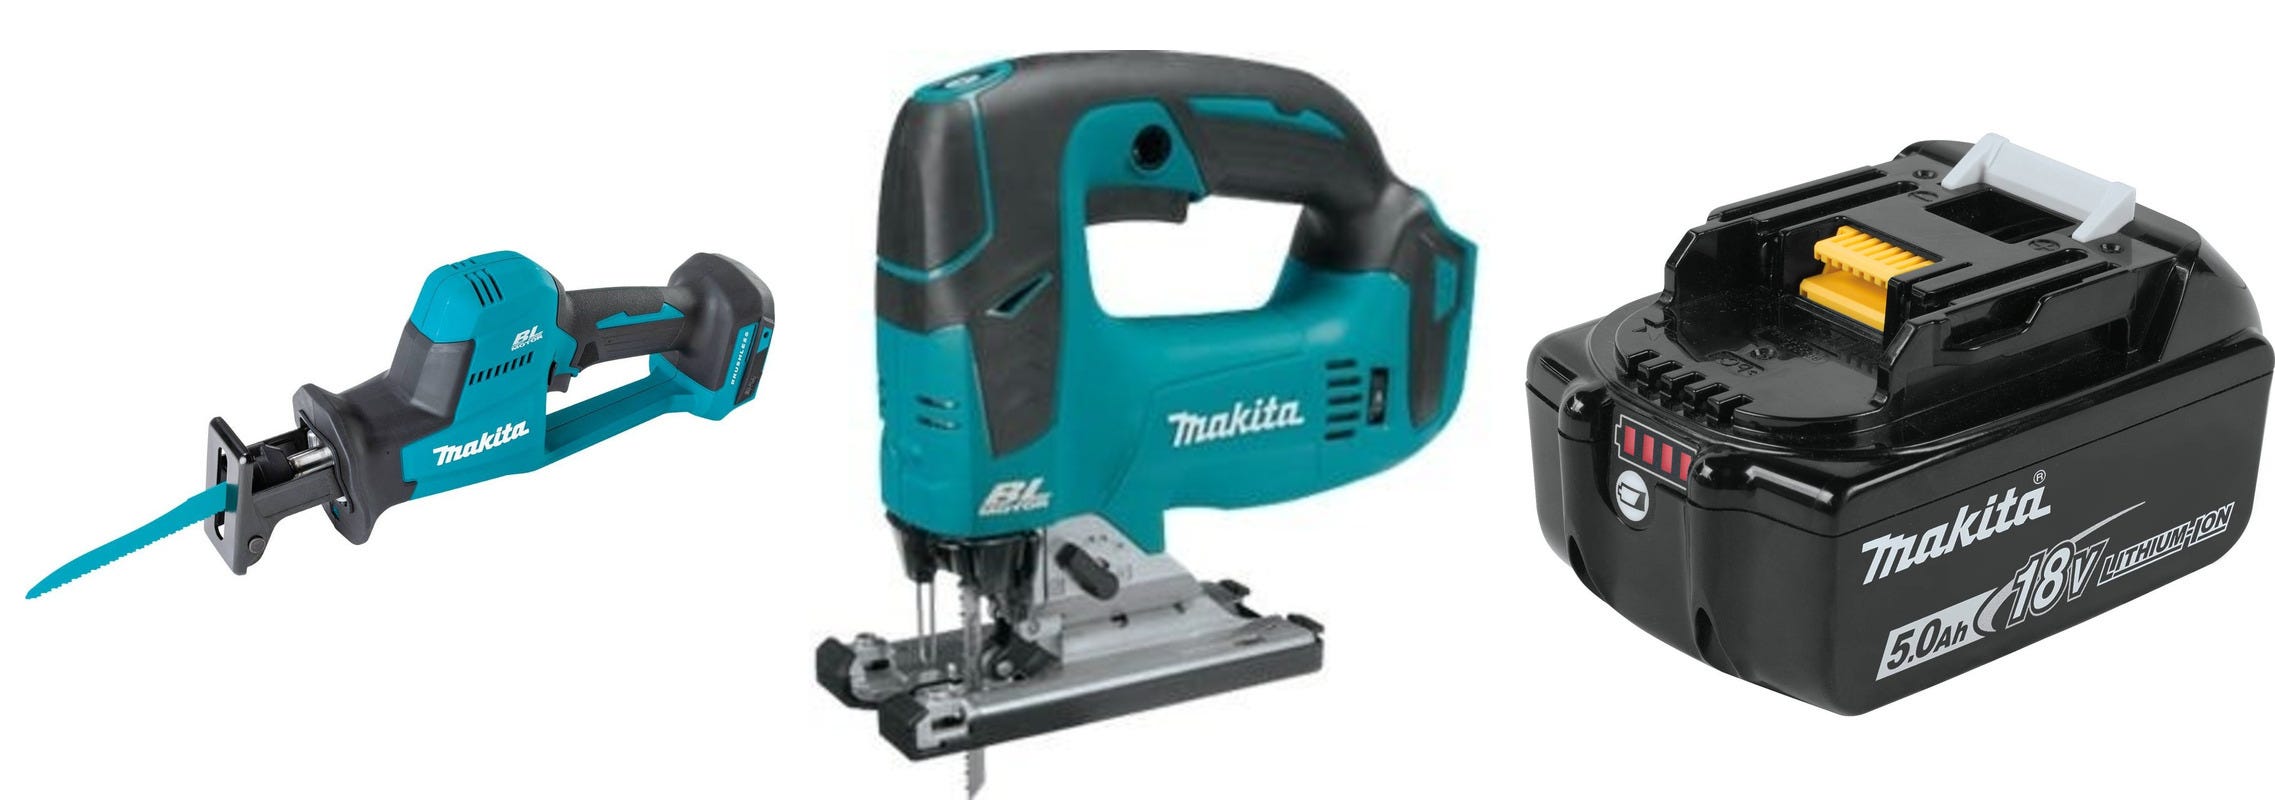 Makita 18V LXT Lithium-Ion Brushless Cordless Compact One-Handed Recipro Saw,  18V LXT Jigsaw, and 18V LXT 5.0aH Battery